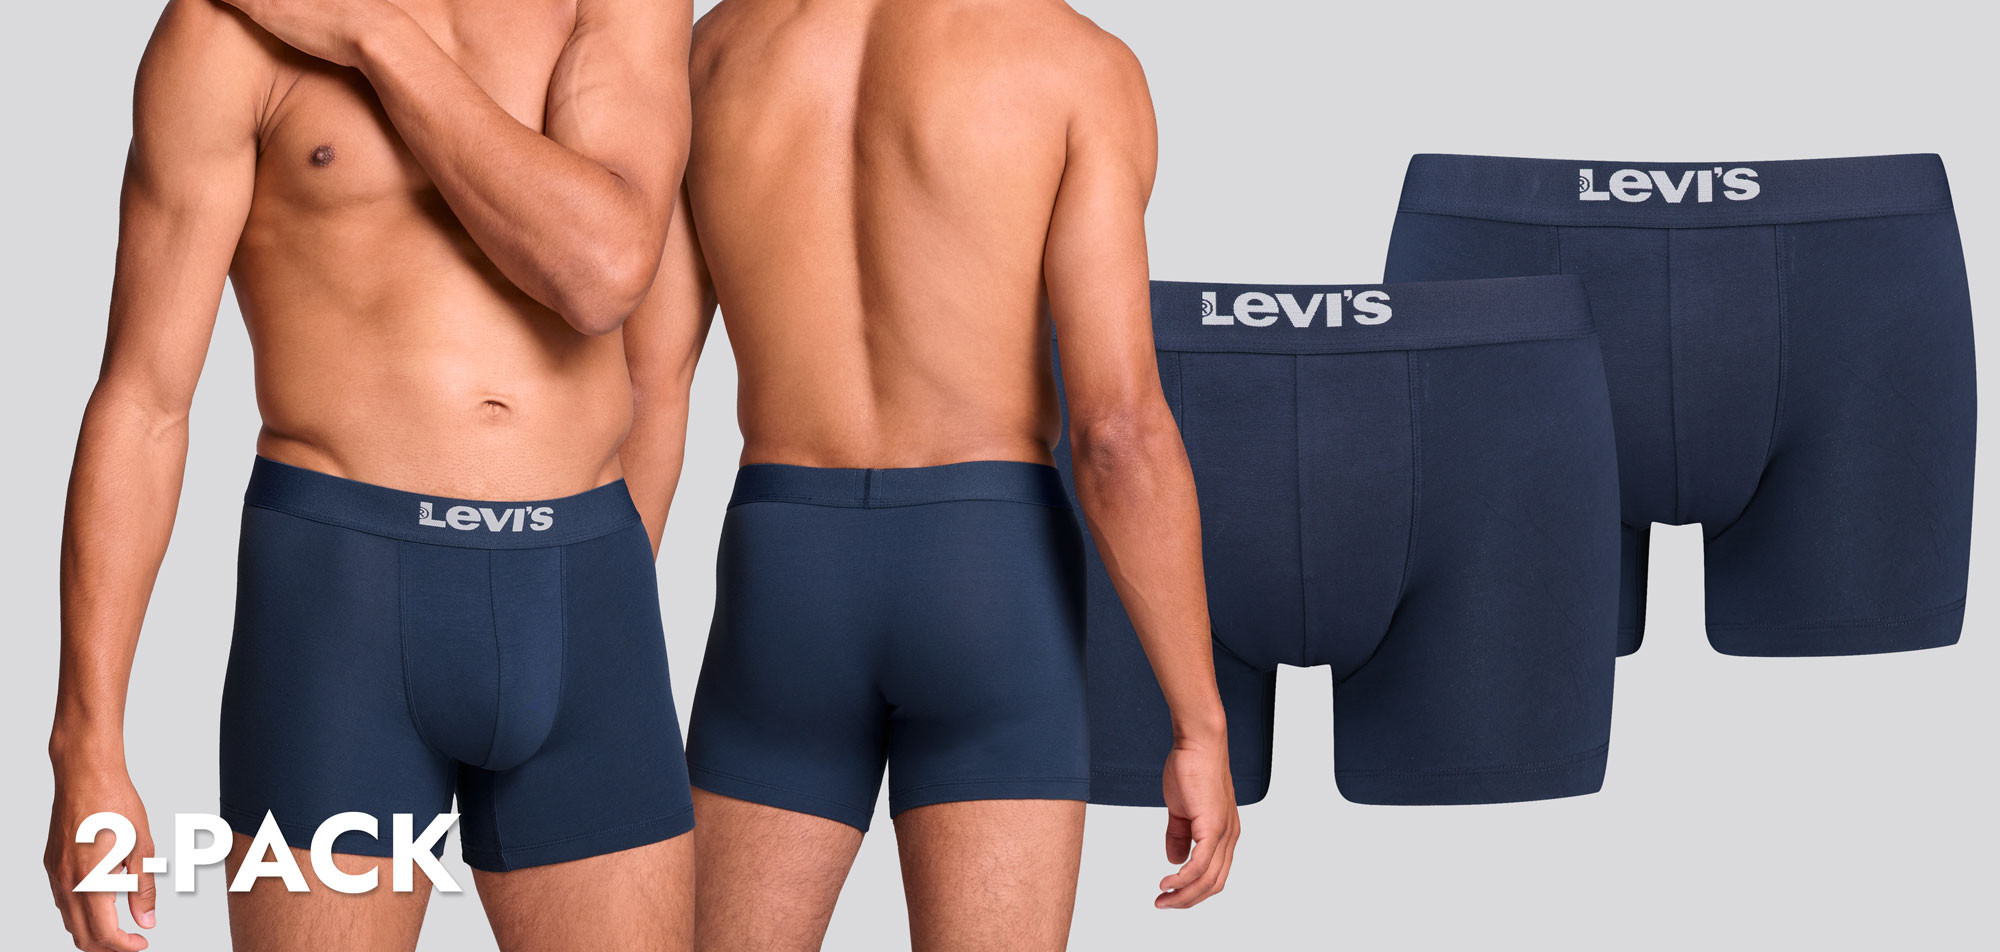 Levi_s Boxer Brief 2-Pack 842 Solid Basic,